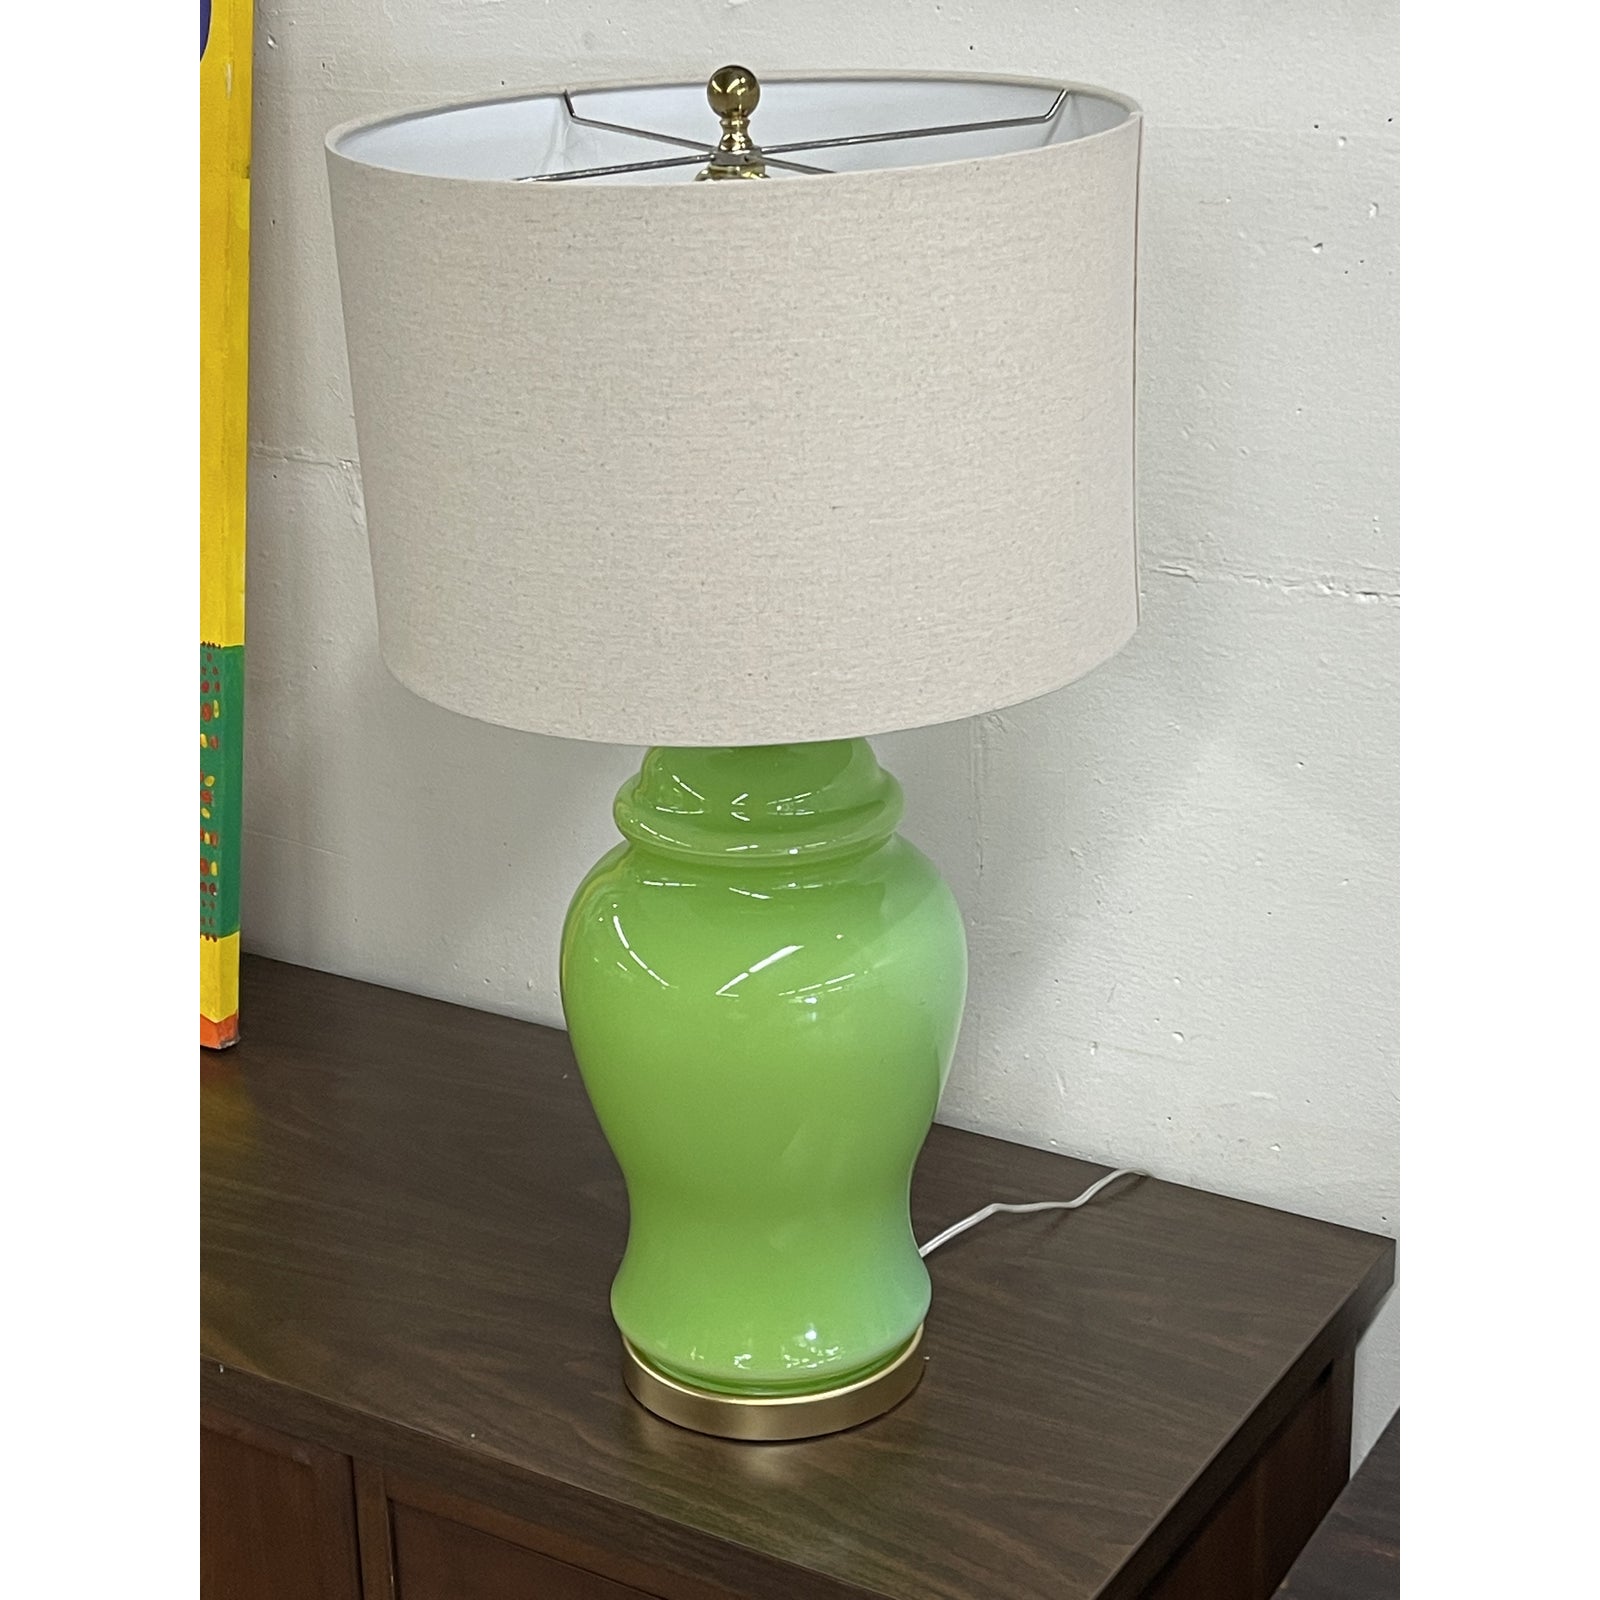 1960s-lime-green-colored-italian-glass-lamp-1152